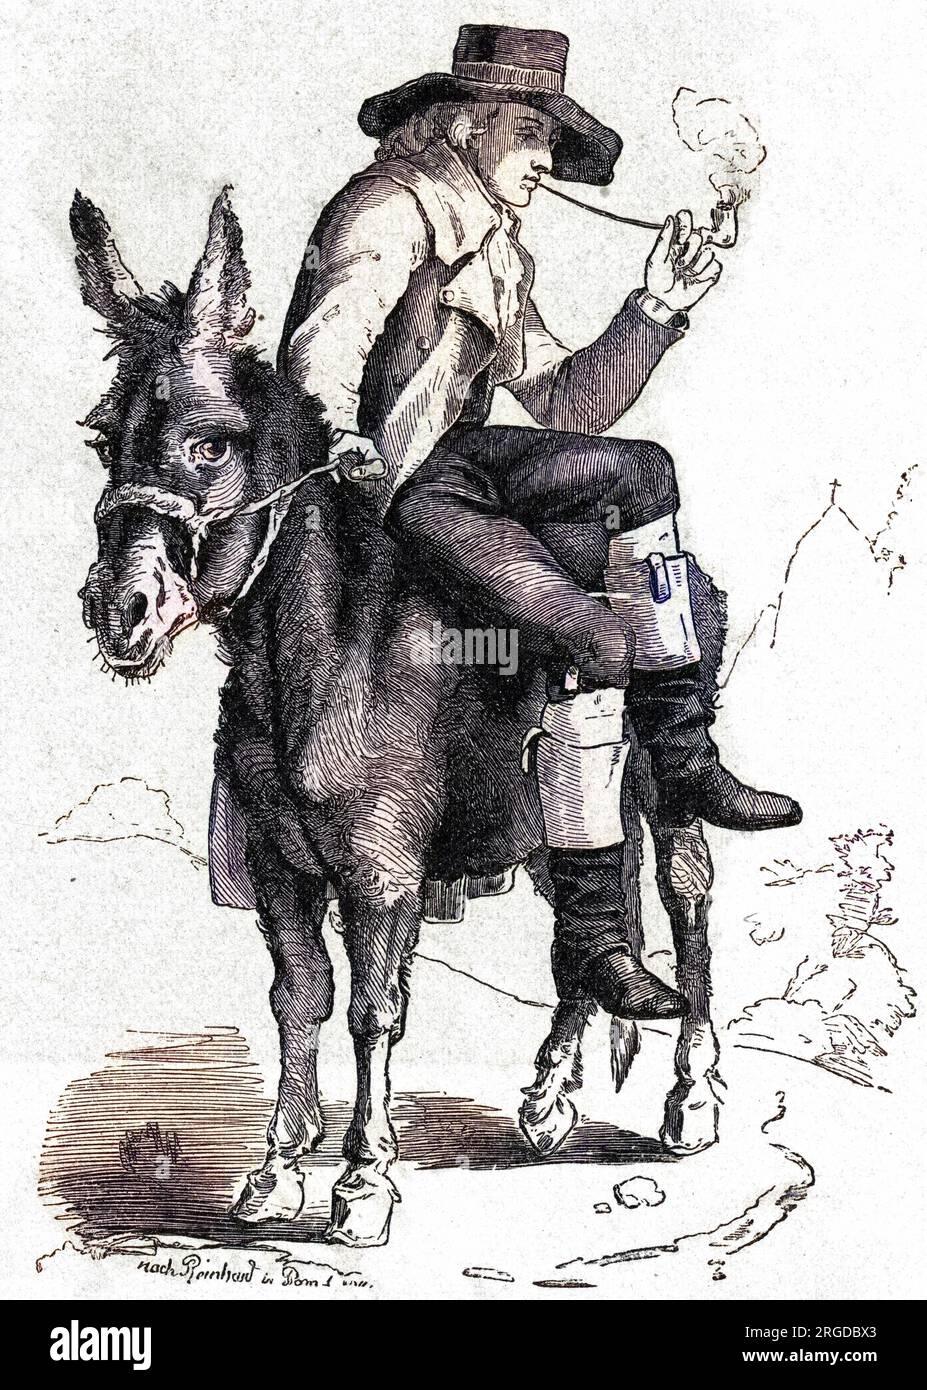 JOHANN CHRISTOPH FRIEDRICH SCHILLER (1759 - 1805), German poet and playwright here depicted riding a donkey at Carlsbad while smoking a pipe. Stock Photo